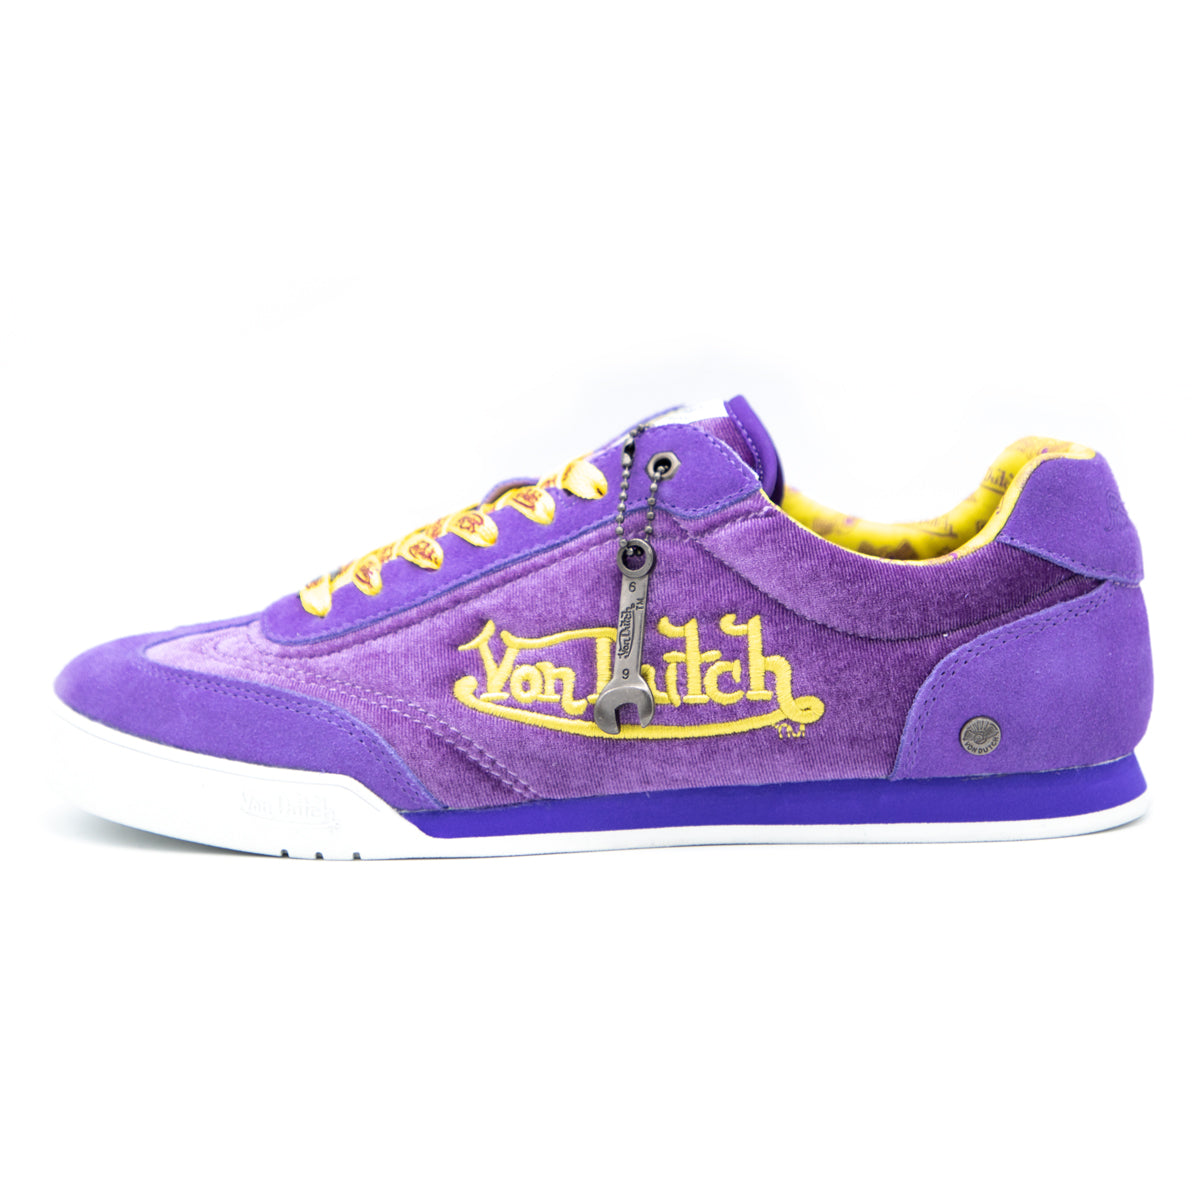 mens purple and gold sneakers